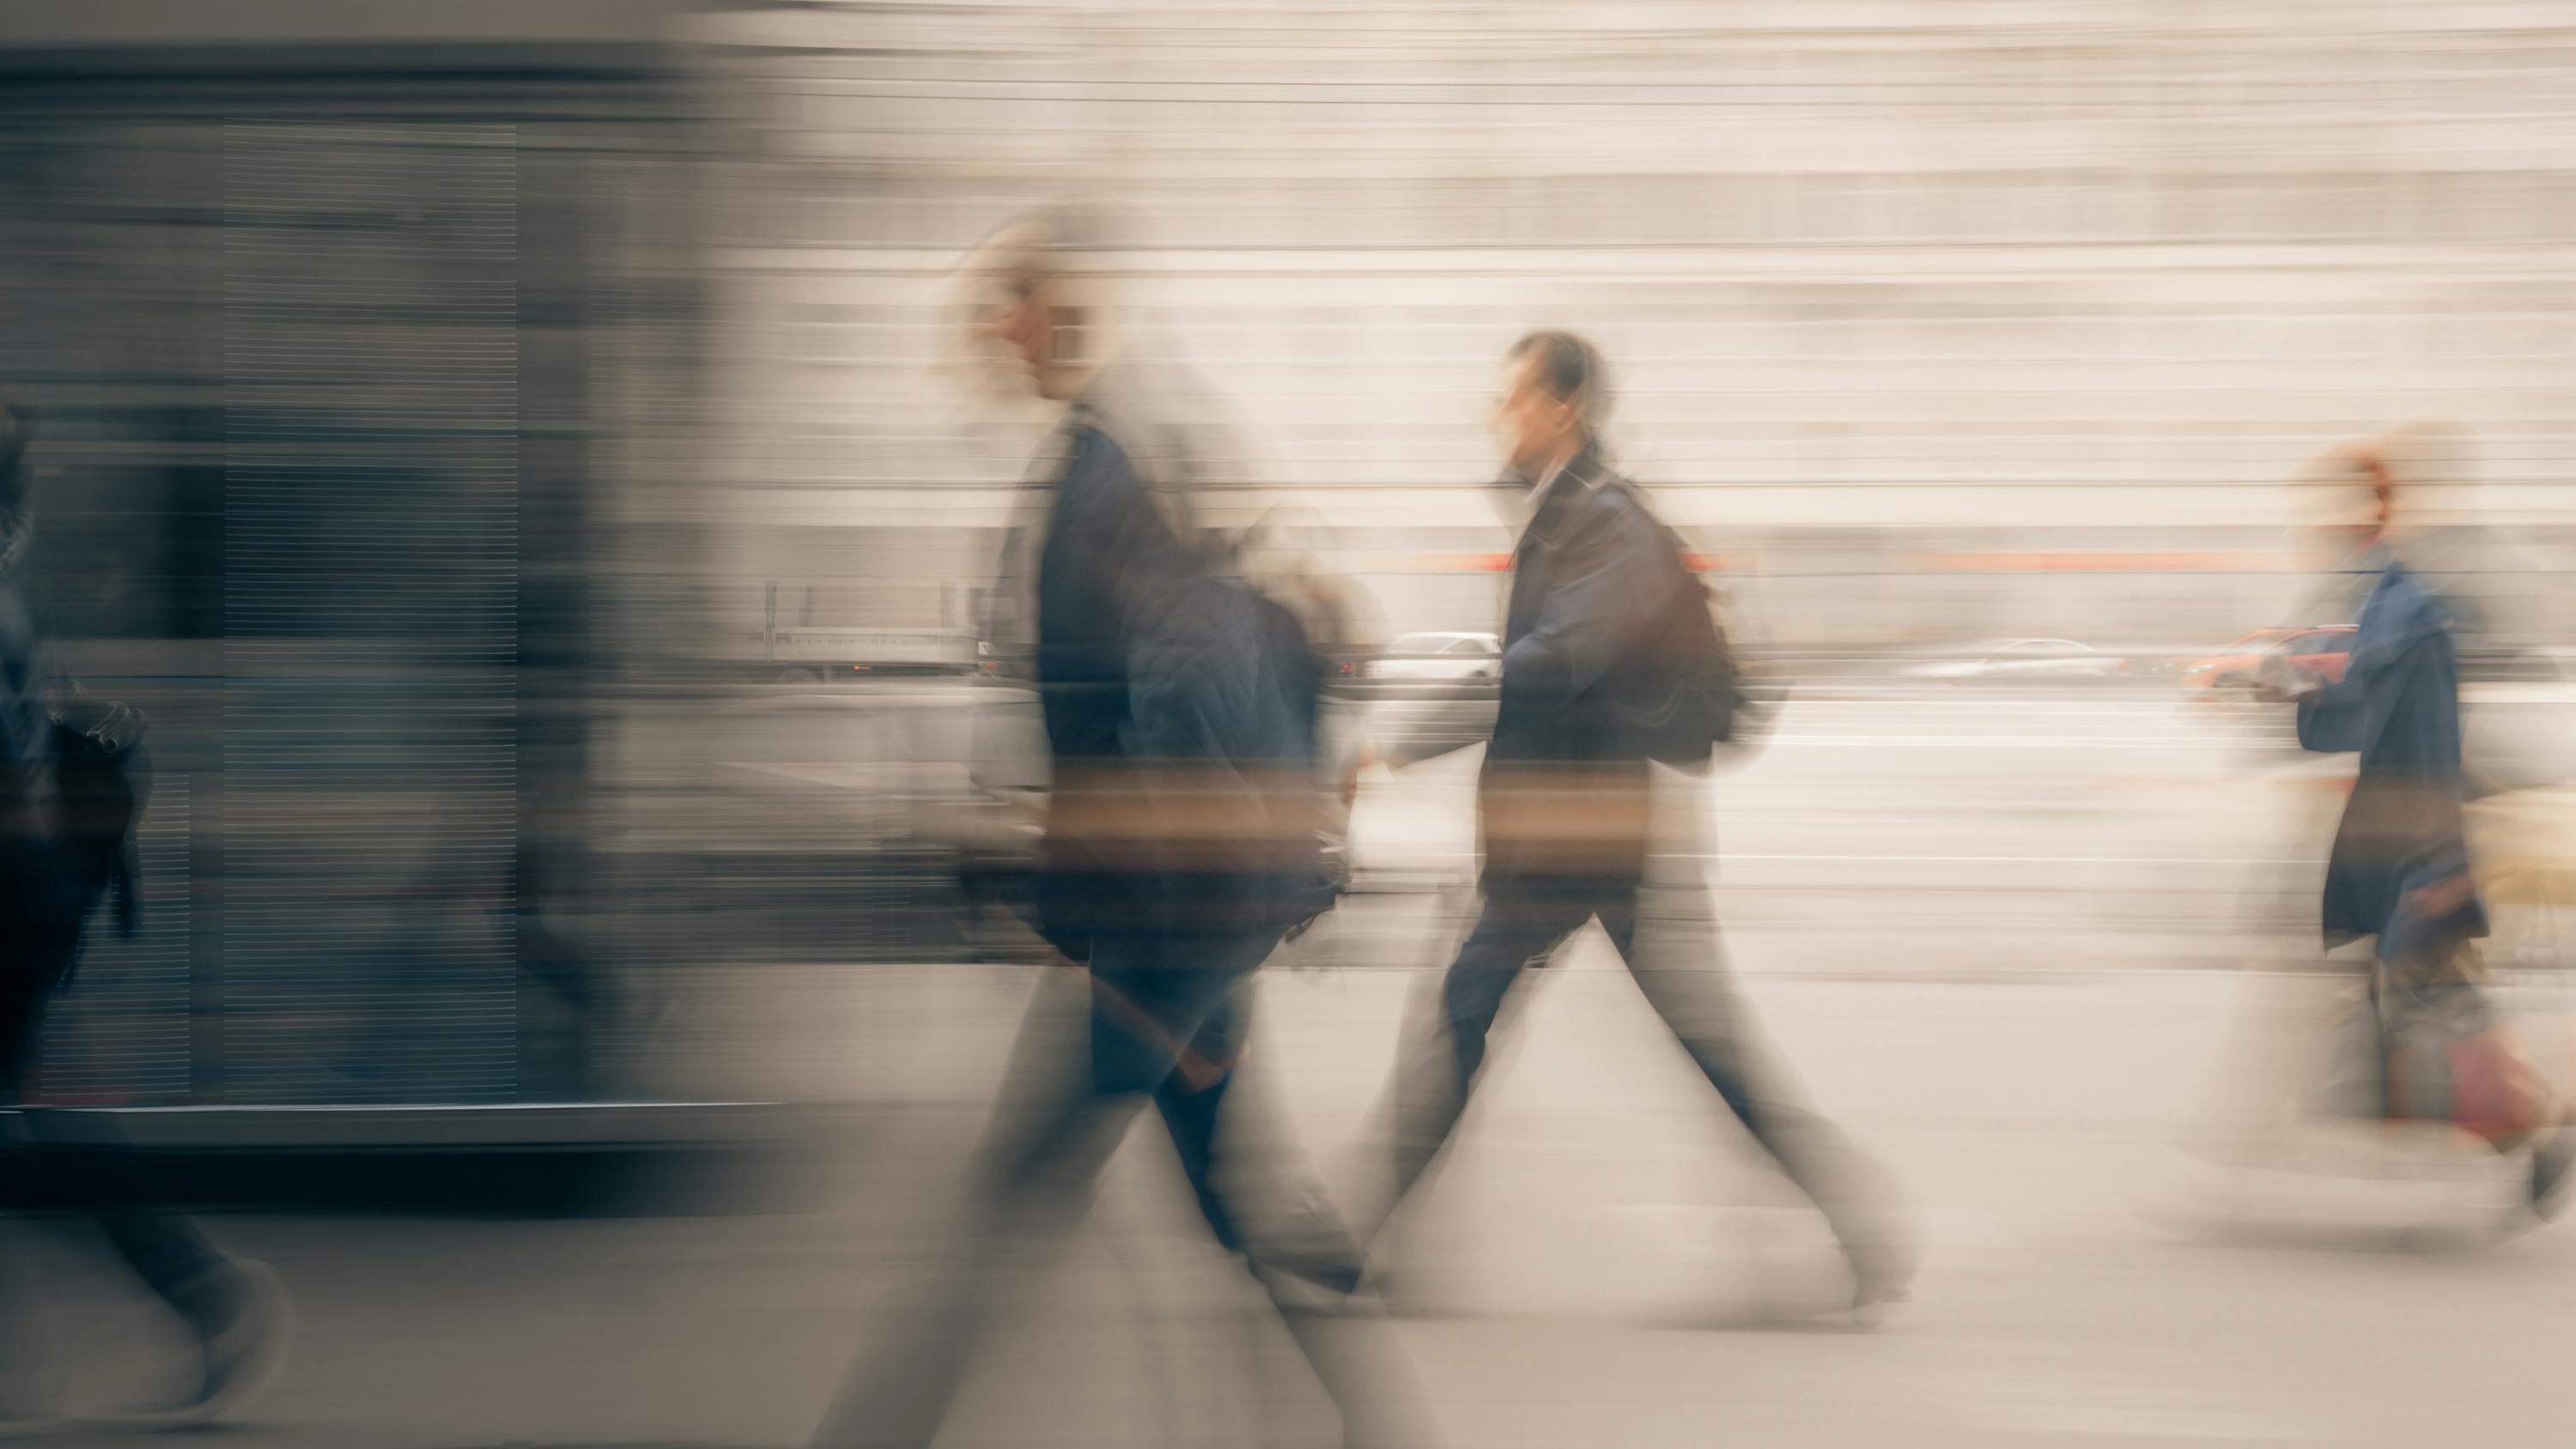 Blurred image of people walking quickly